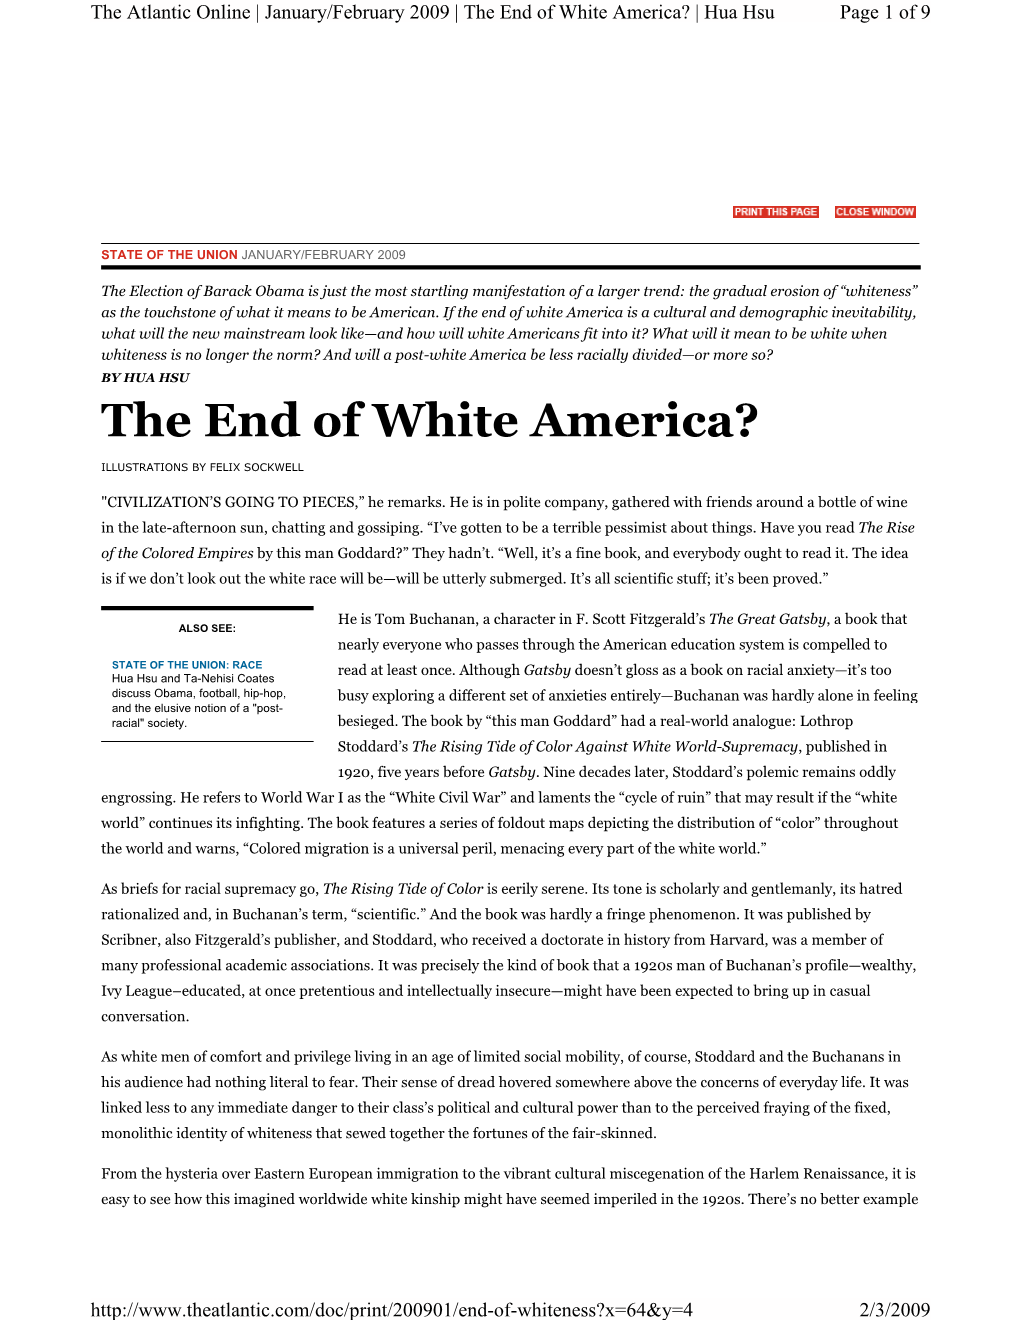 The End of White America? | Hua Hsu Page 1 of 9